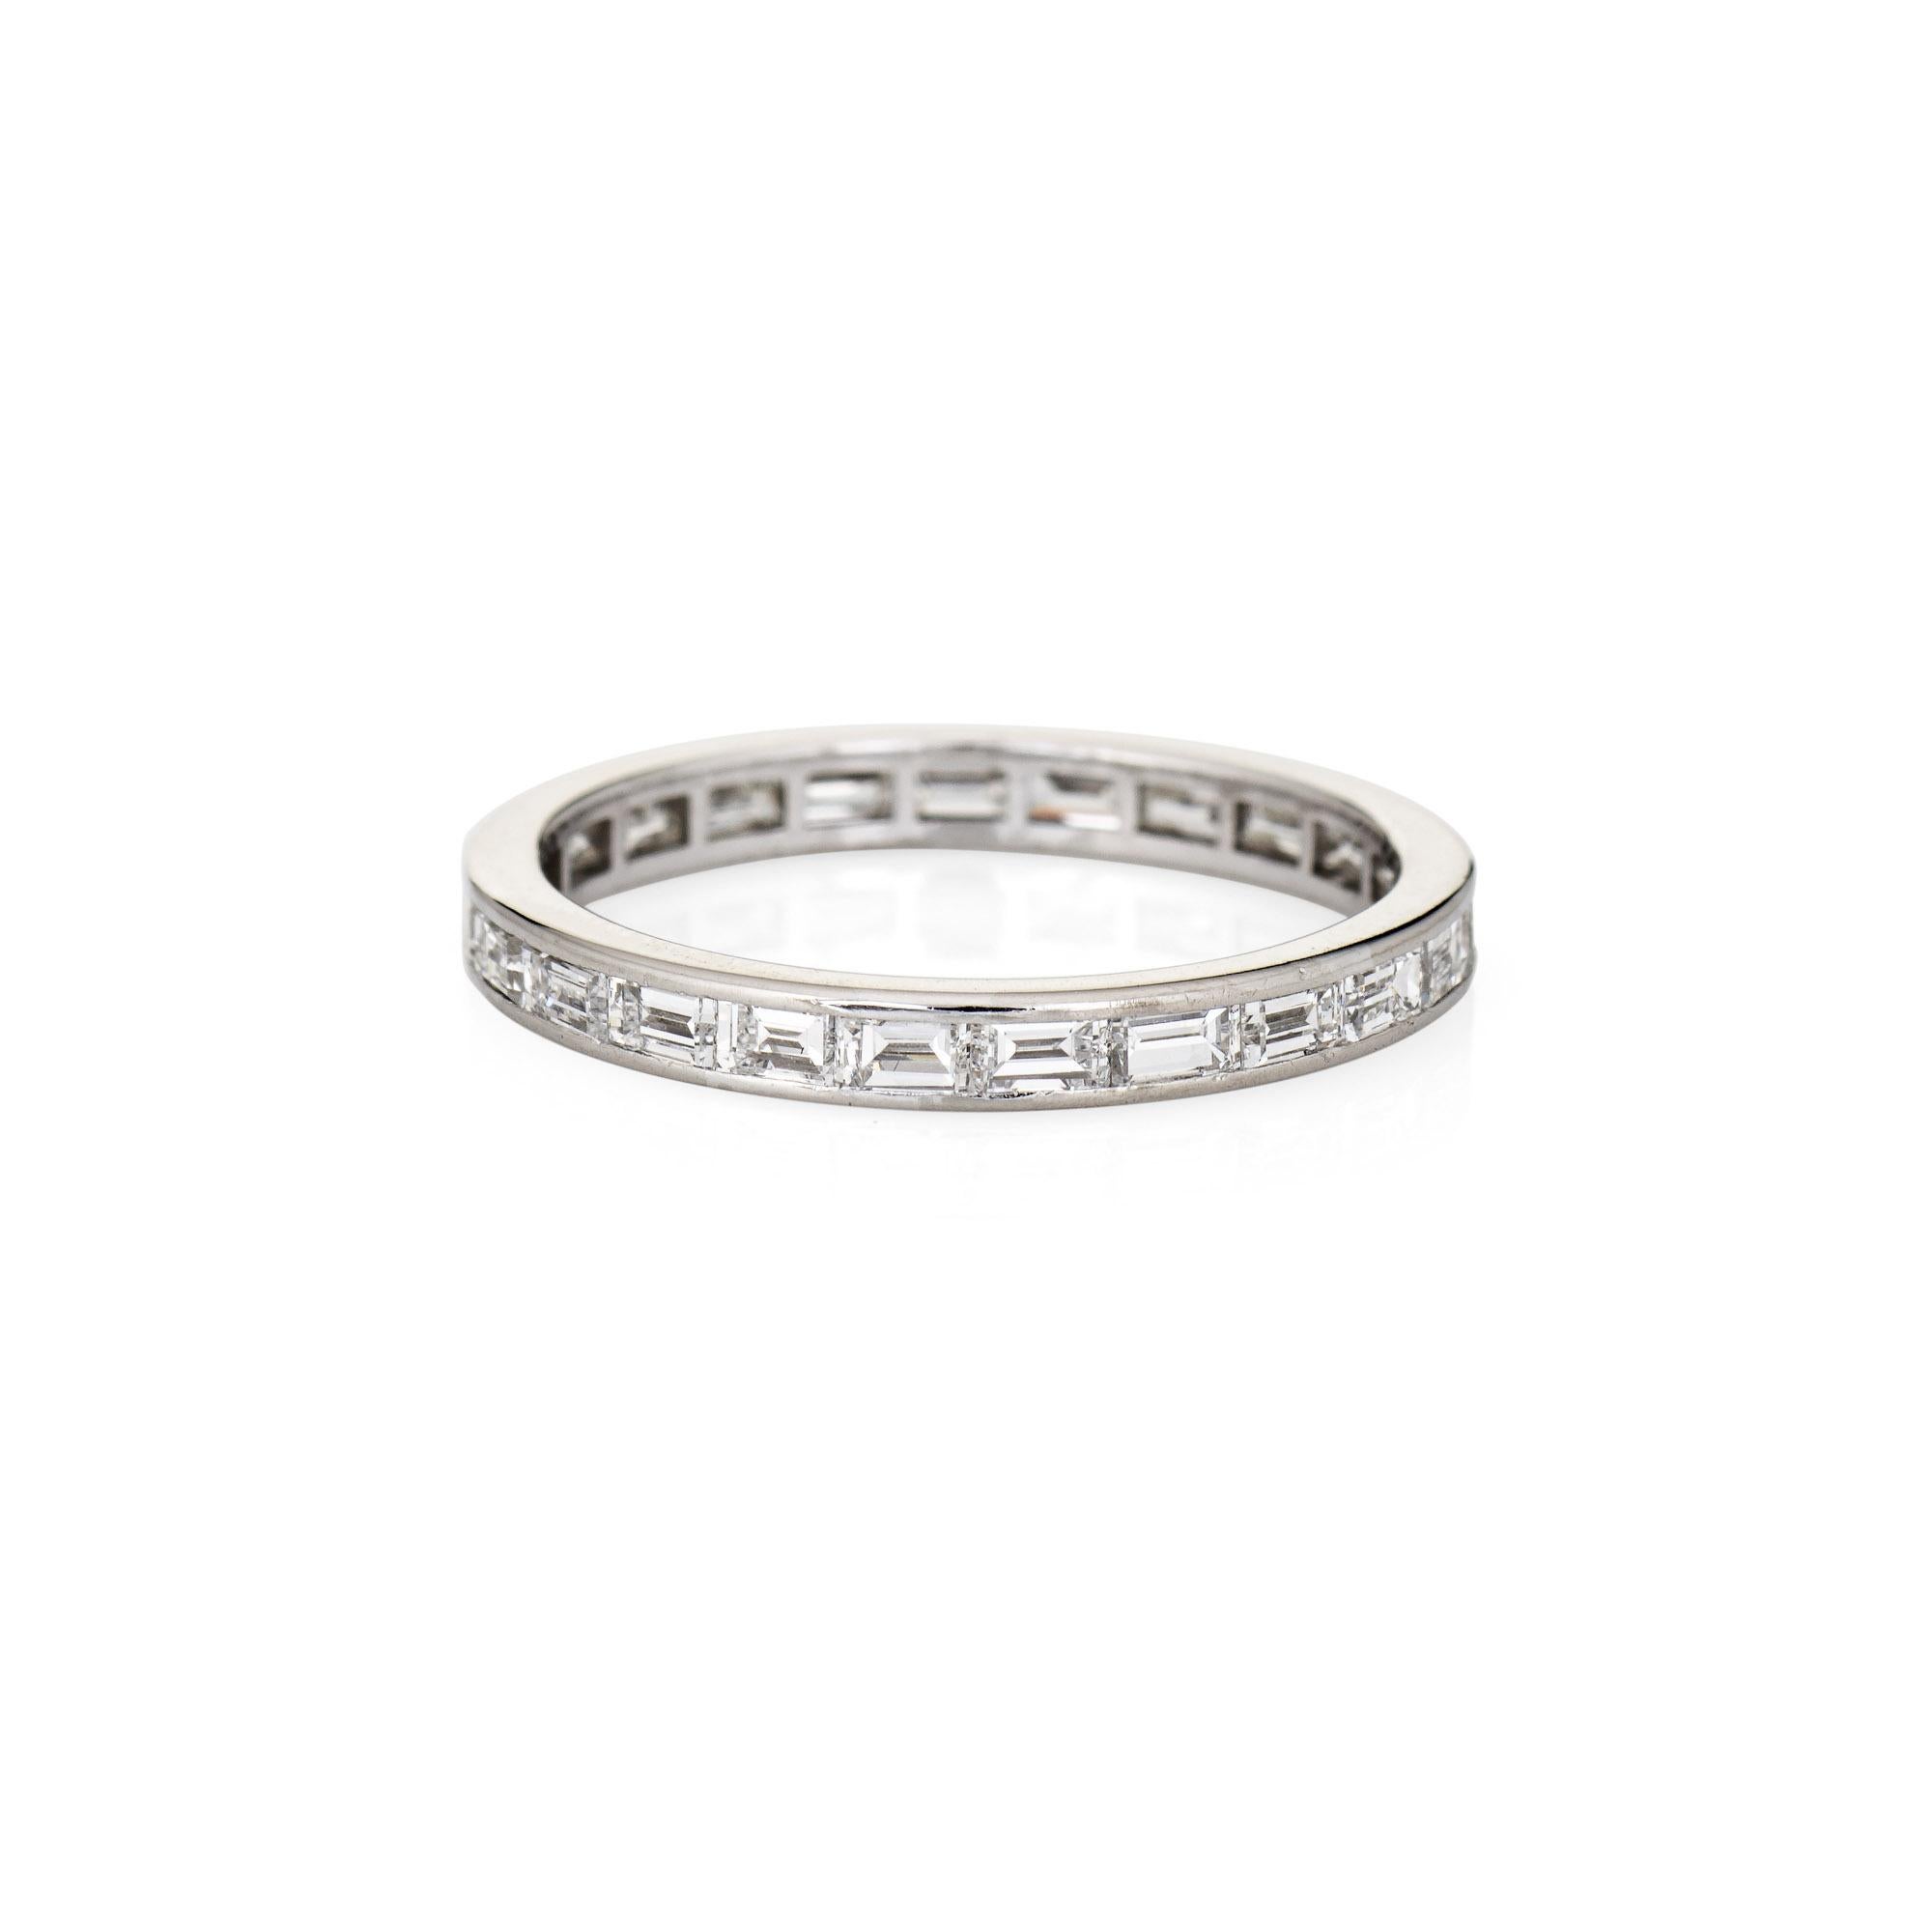 Stylish vintage Art Deco diamond eternity ring (circa 1920s to 1930s) crafted in platinum. 

23 emerald cut diamonds total an estimated 0.92 carats (estimated at G-H color and VS1-22 clarity).  

The elegant Art Deco era ring features sparkling